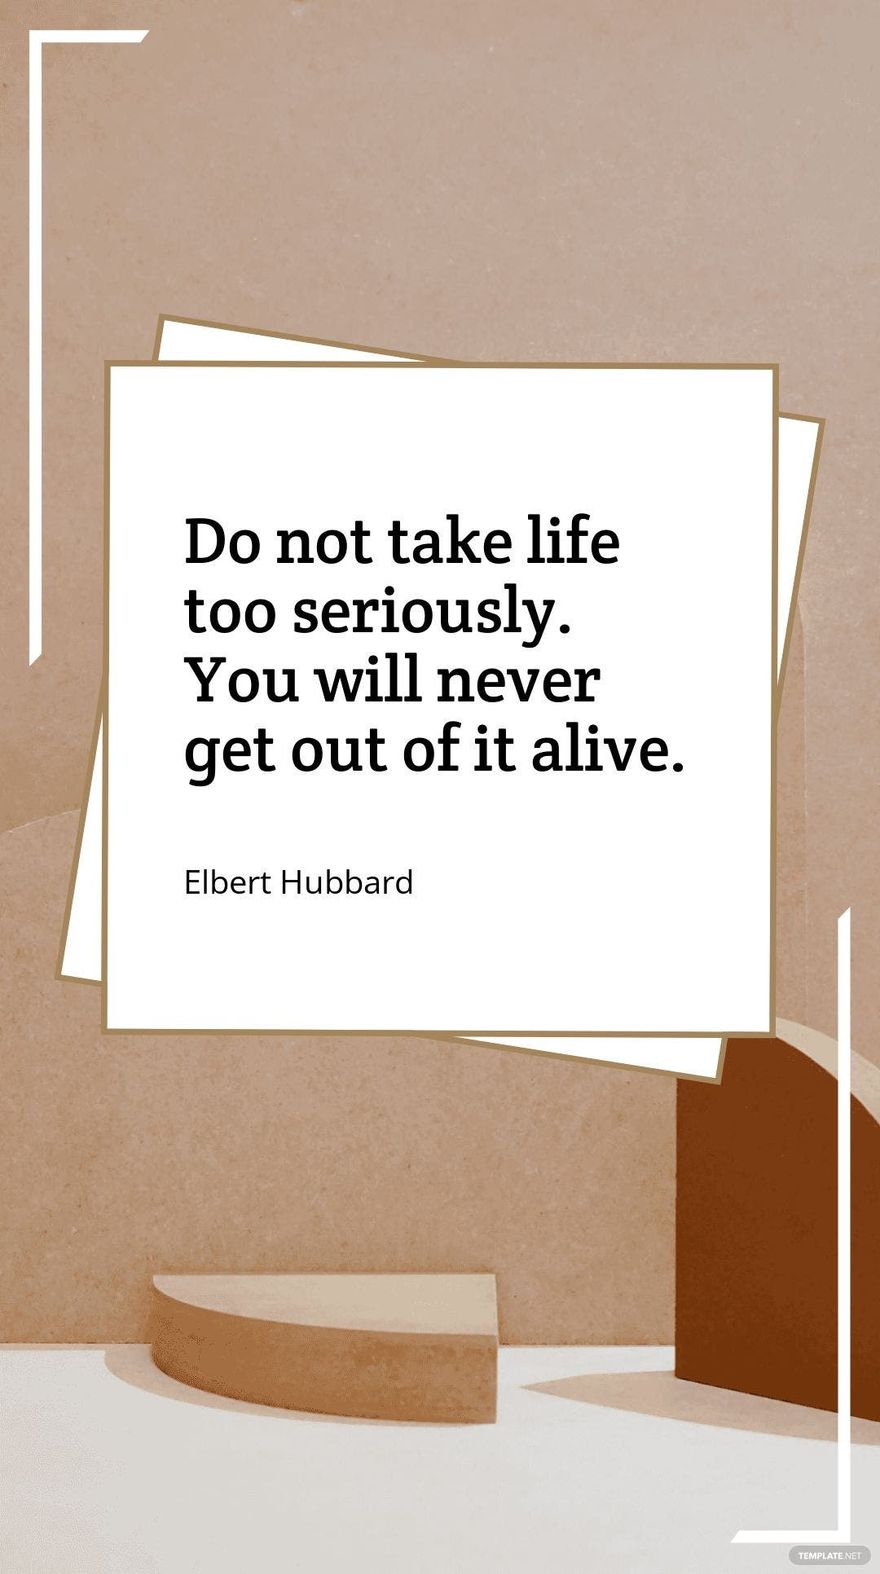 Elbert Hubbard - Do not take life too seriously. You will never get out of it alive.